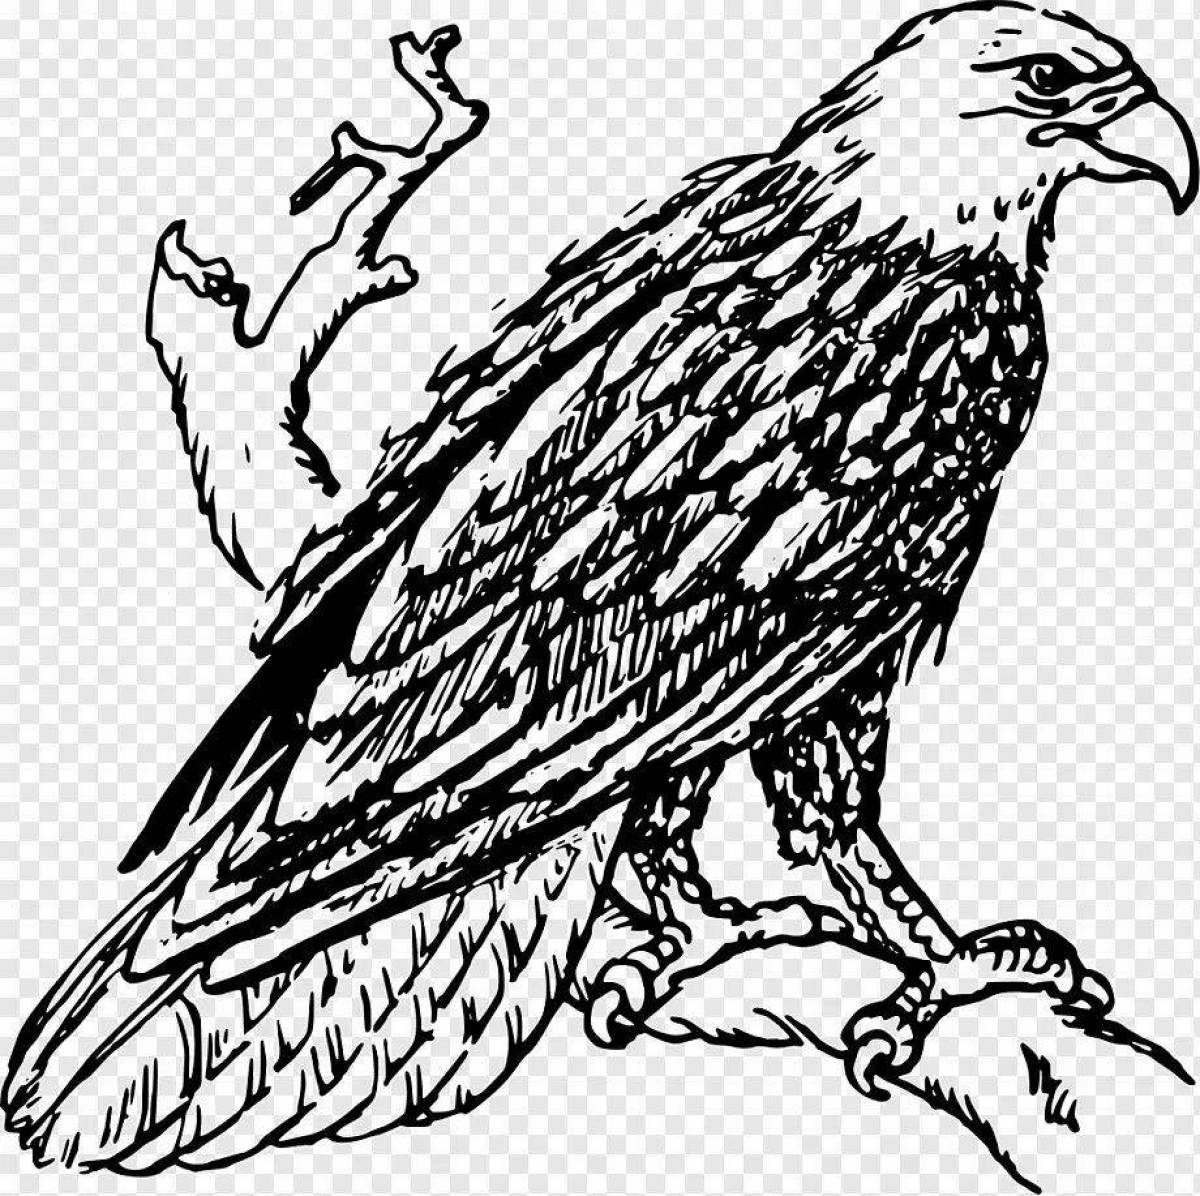 Coloring book magnificent white-tailed eagle